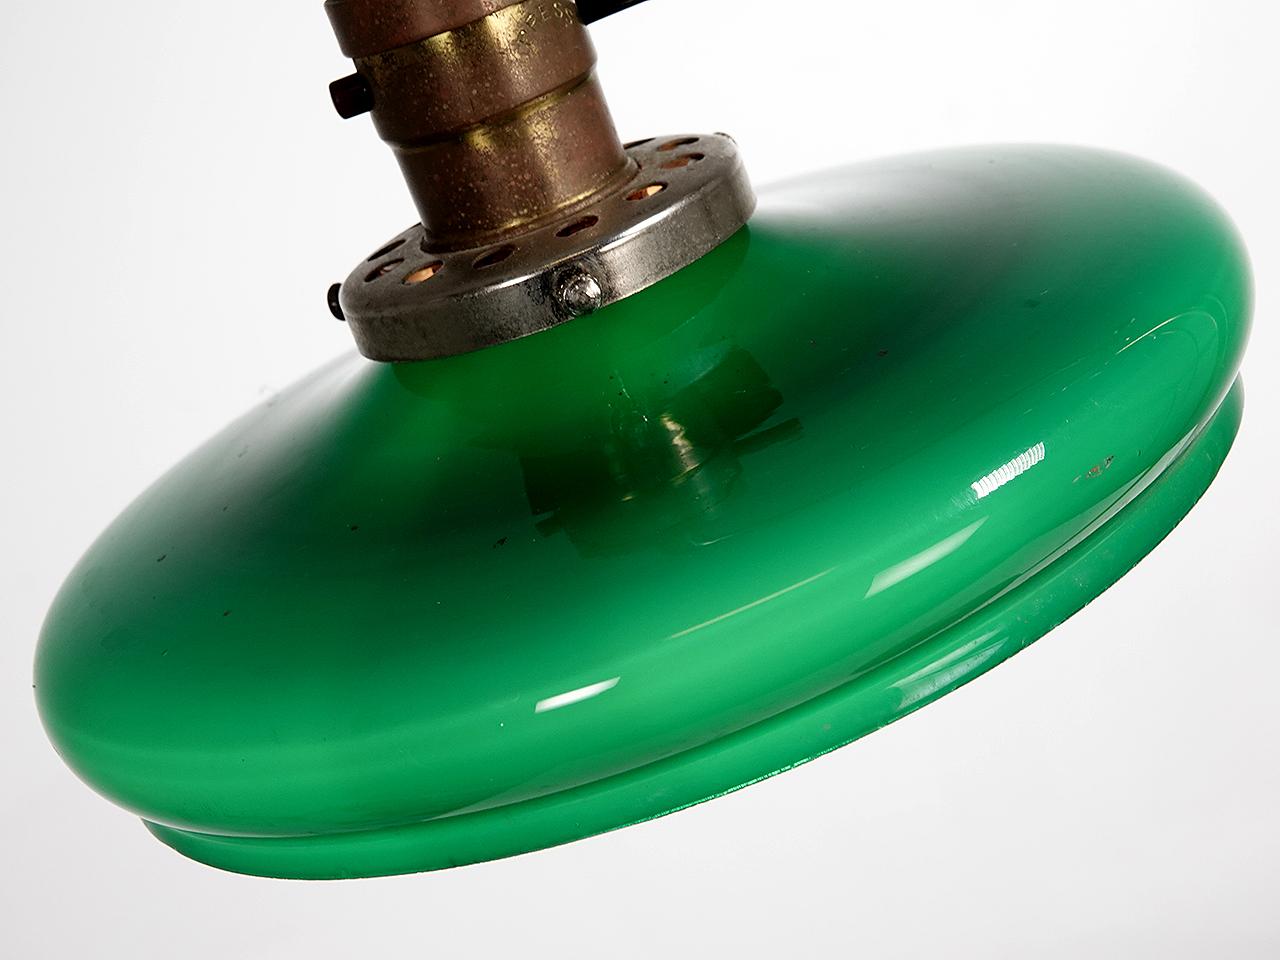 This is a really clean and simple brass desk lamp with a rare unique shade. The shade is an emerald over white sandwich glass that has a nice flattened profile giving the lamp a look all its own. The shade and horizontal arm can turn and ride up or